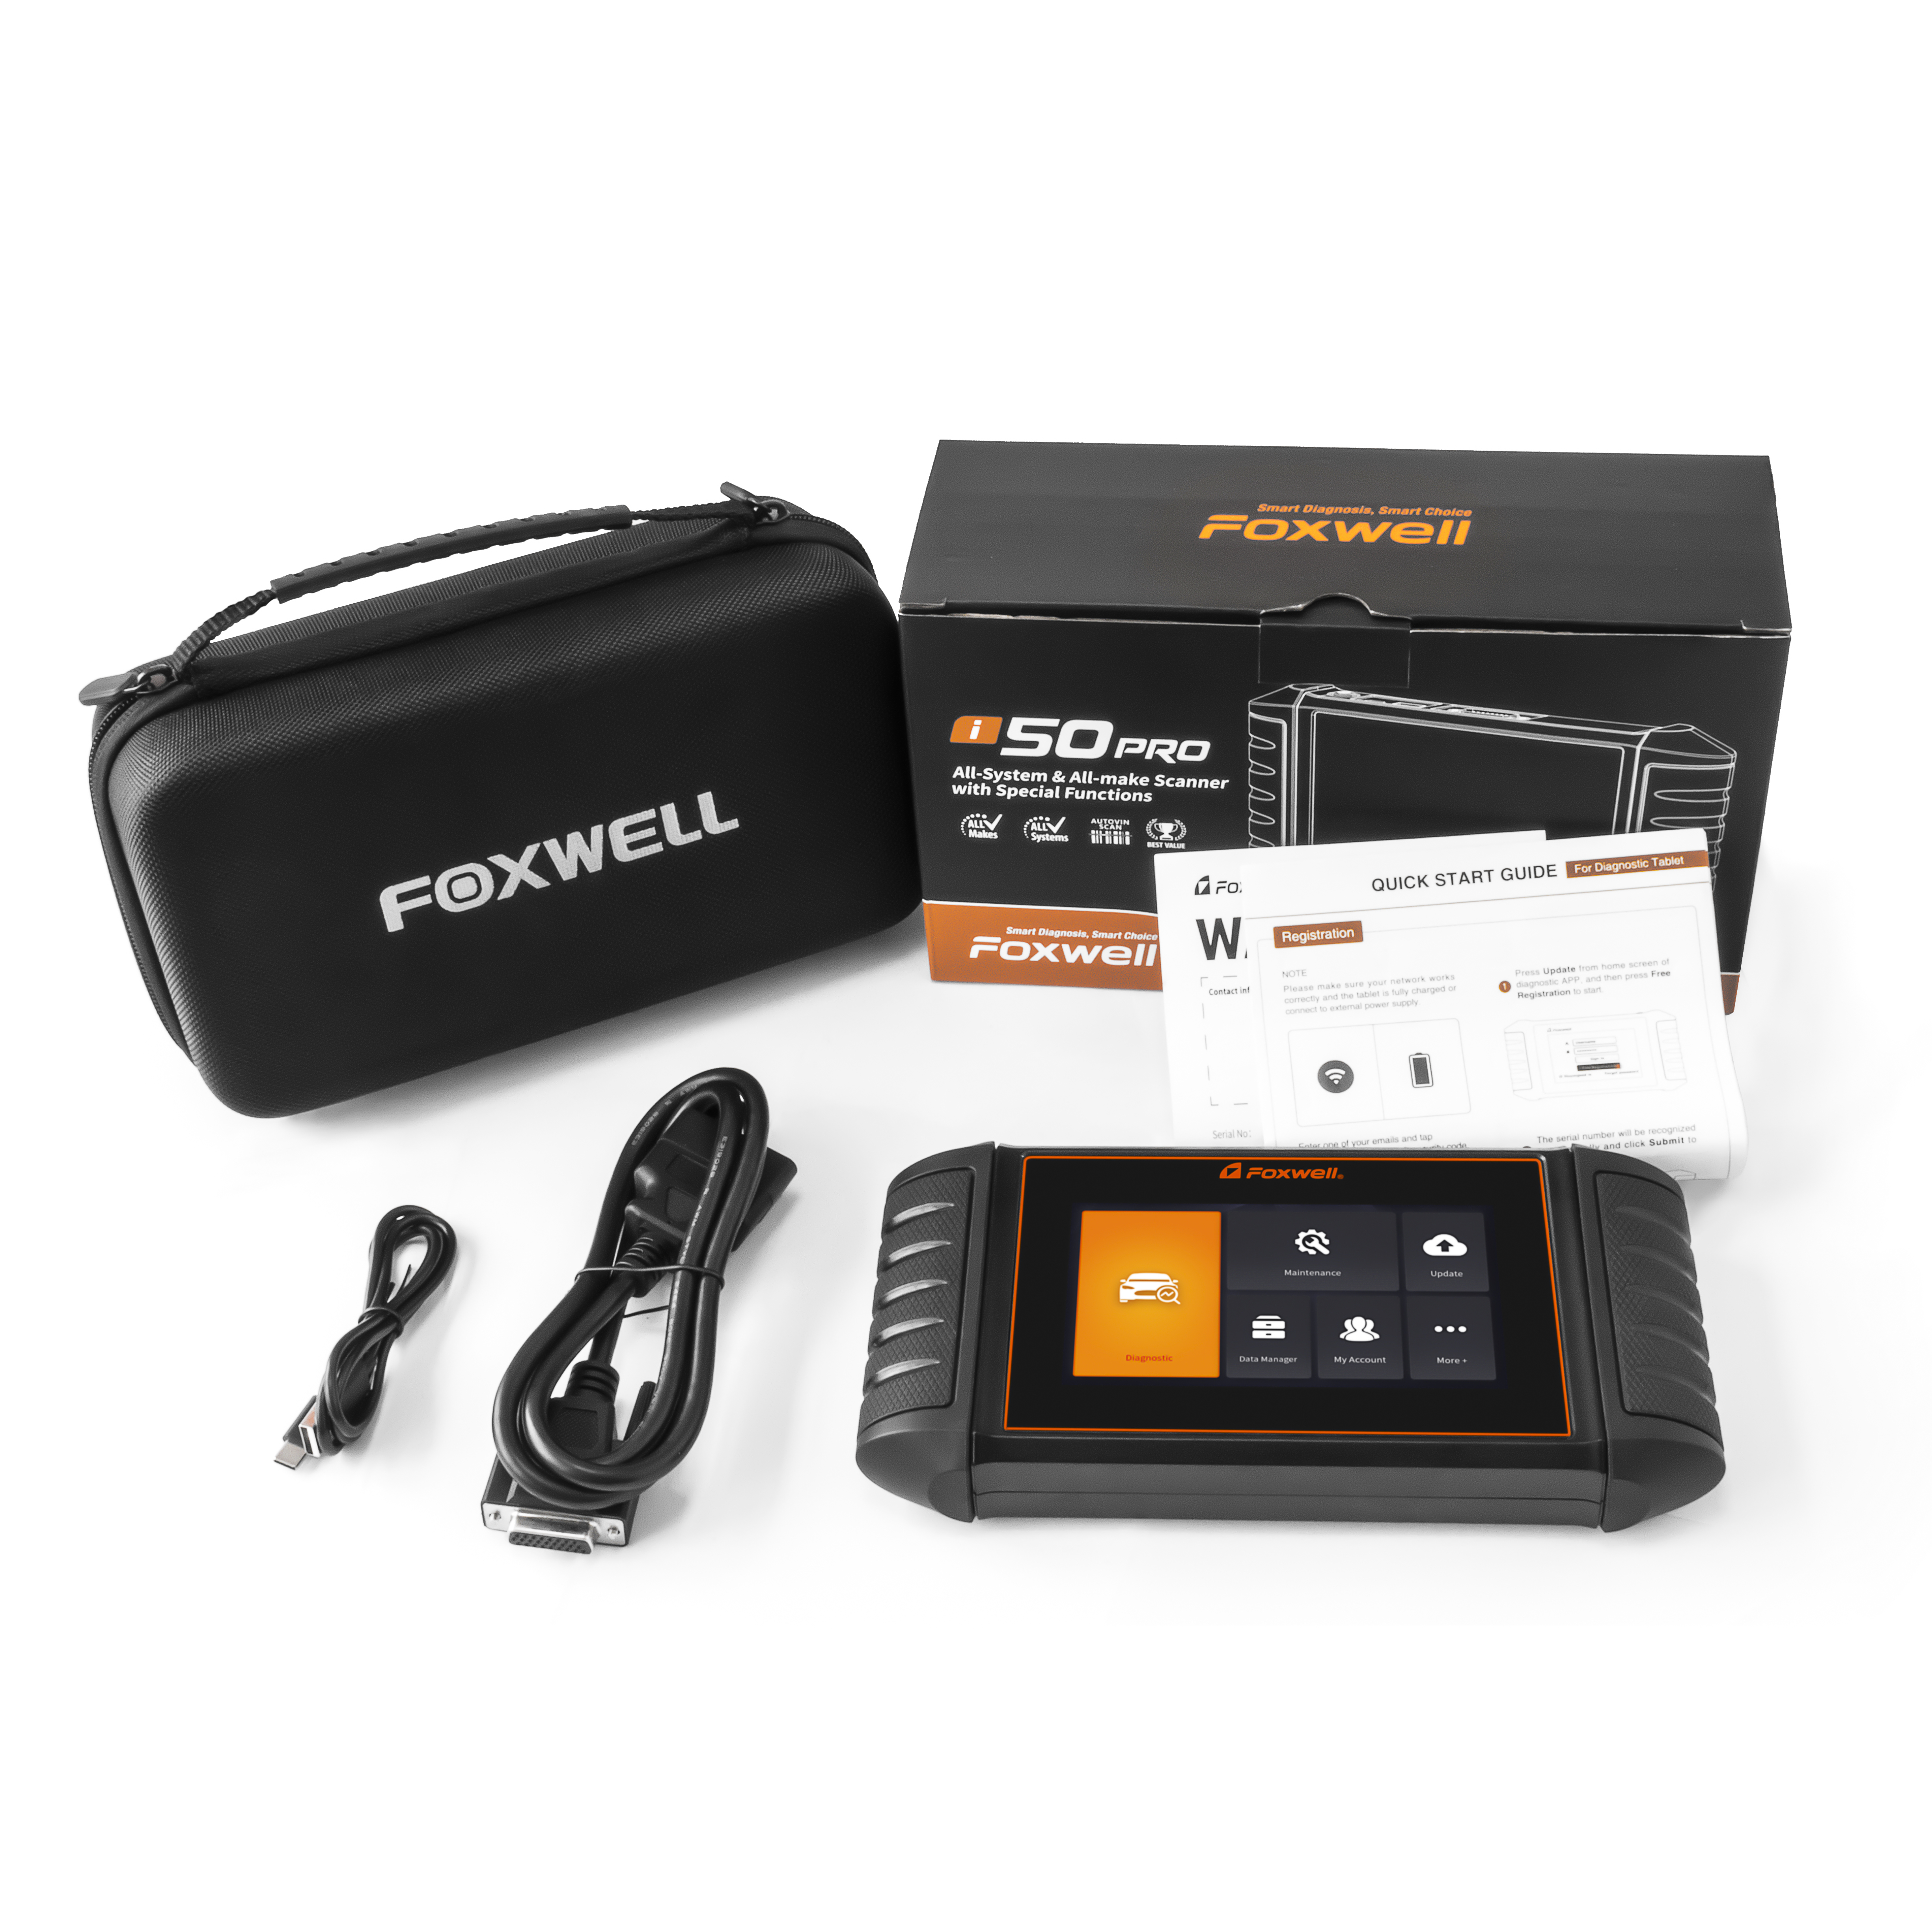 Foxwell i50Pro 5.5'' All-System & All-make Scanner with Special Functions Diagnostic Tool Android Tablet Scanner Universal Vehicle Tools